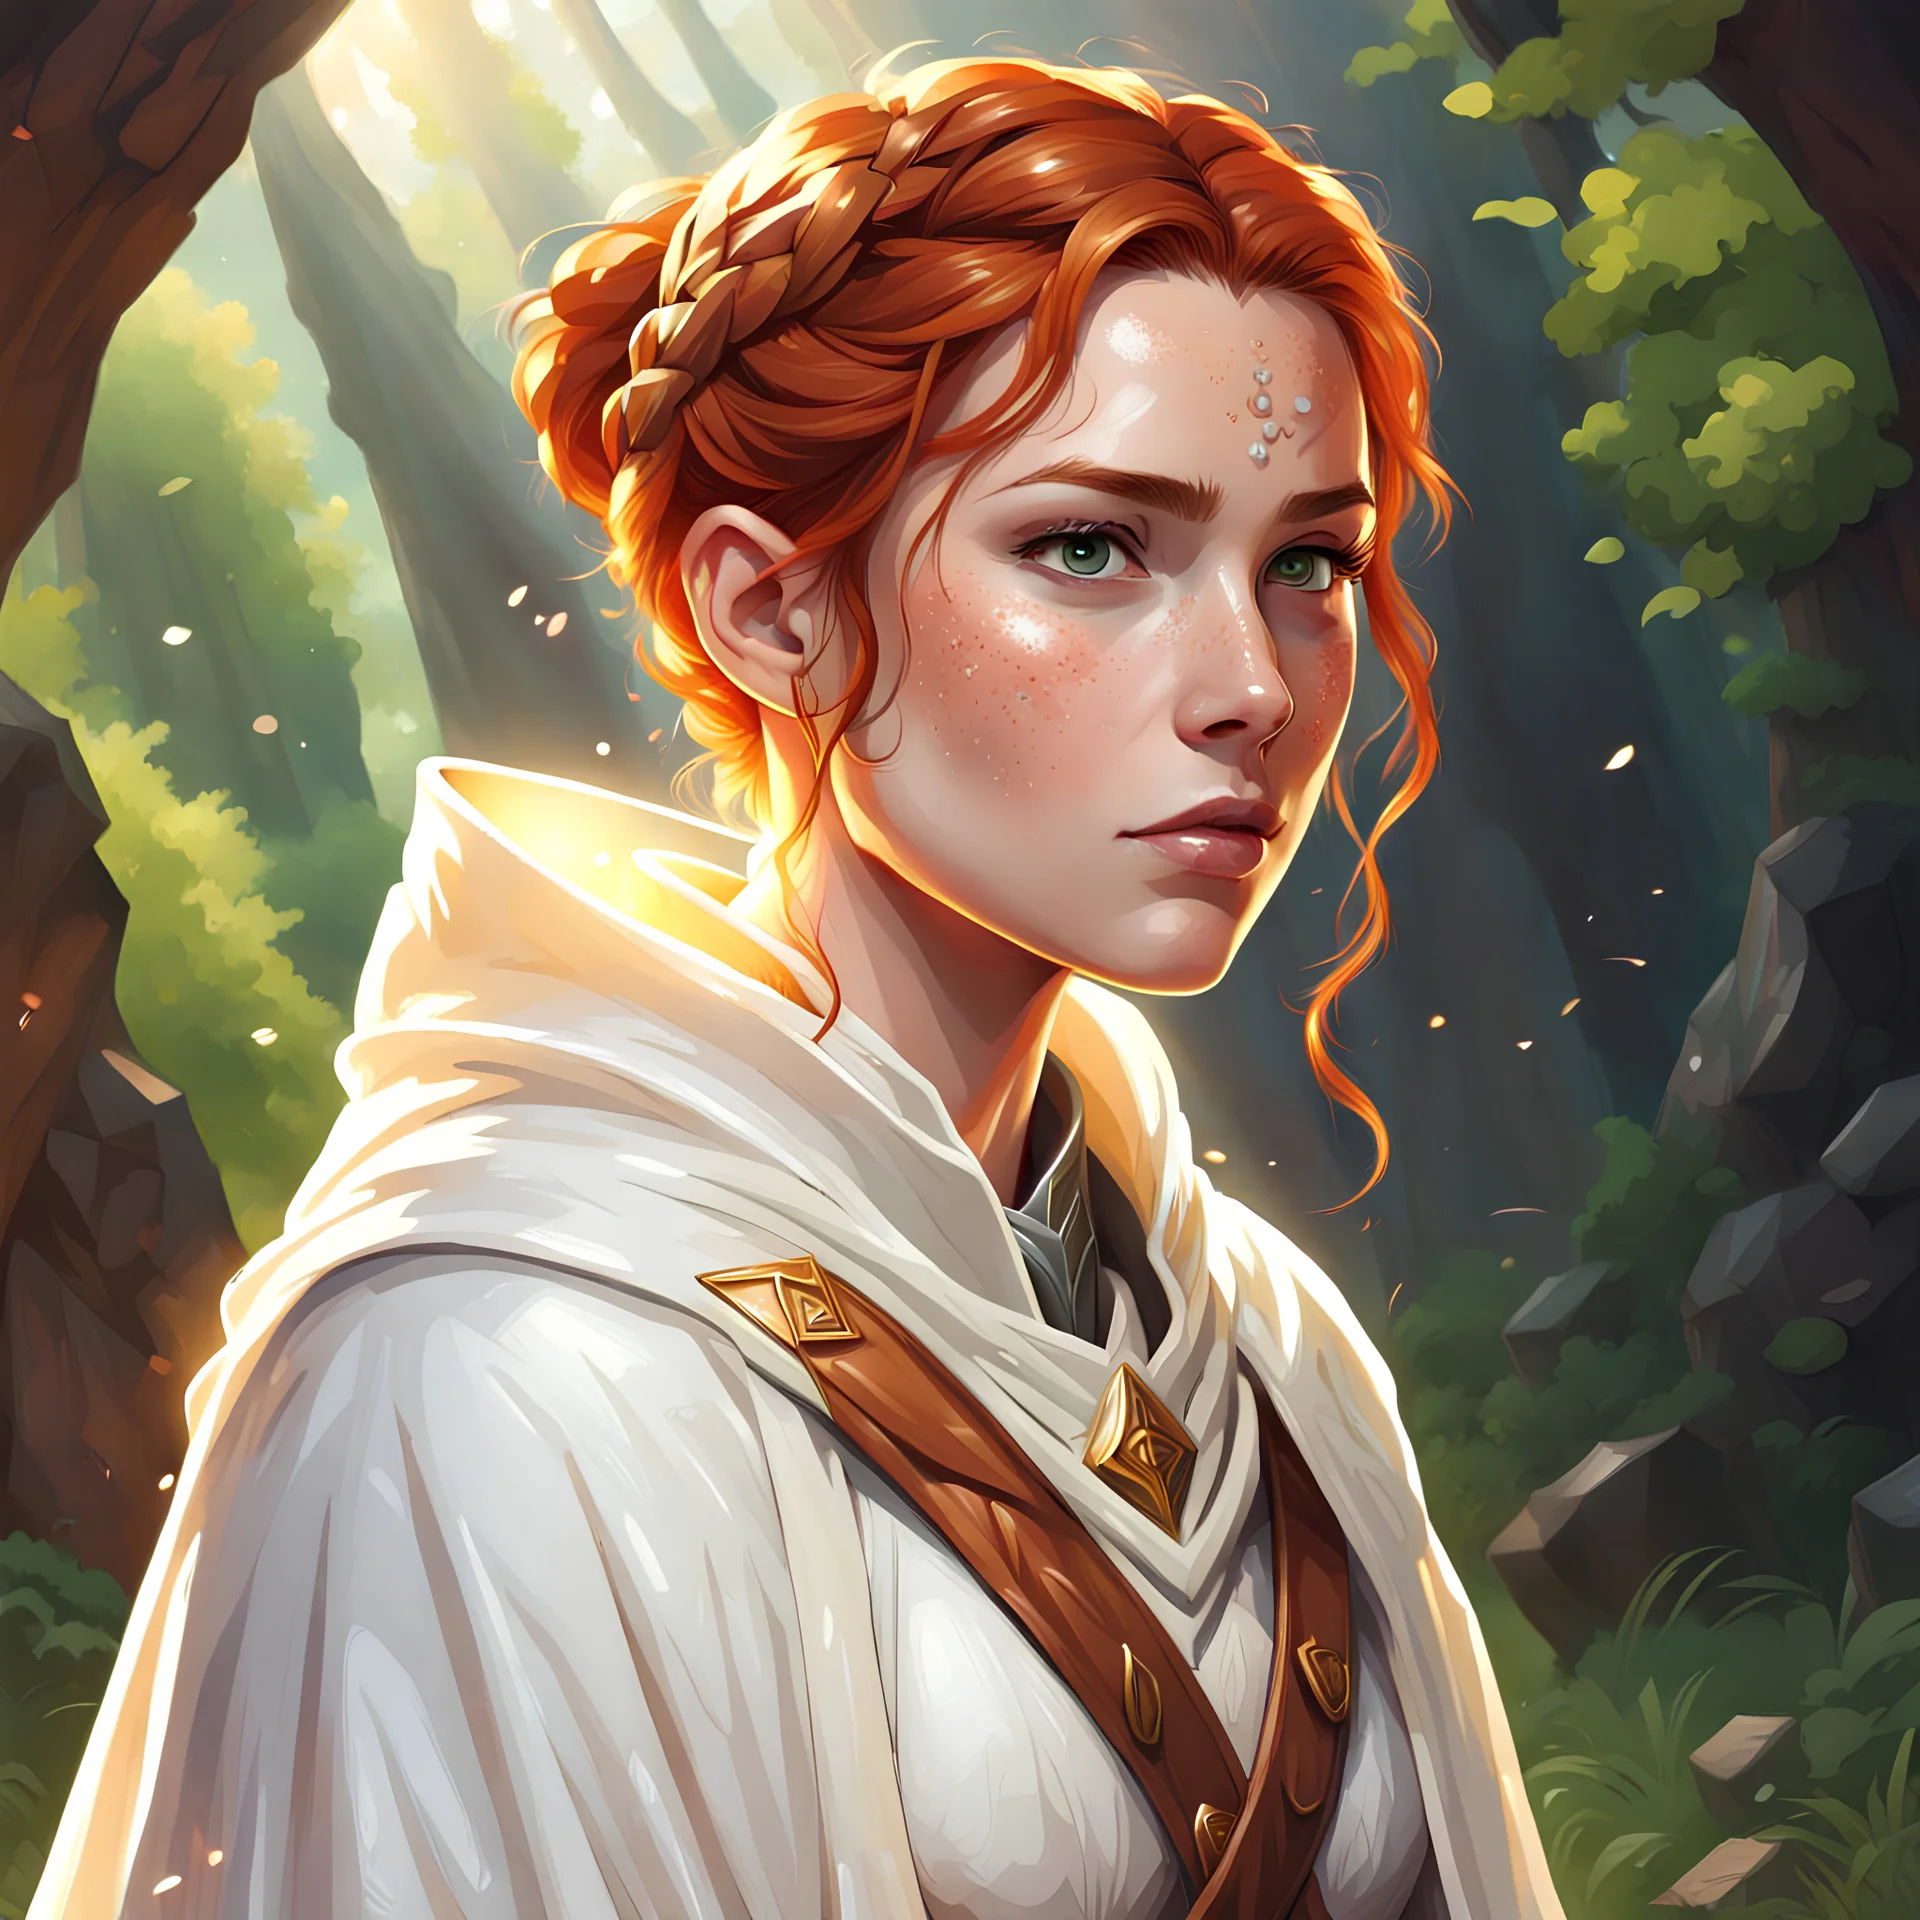 dungeons & dragons; portrait; teenager; female; cleric; ginger hair; braided bun; brown eyes; cloak; flowing robes; cleric armor; nature; sunny; freckles; trusting; healing magic; prayer; veil